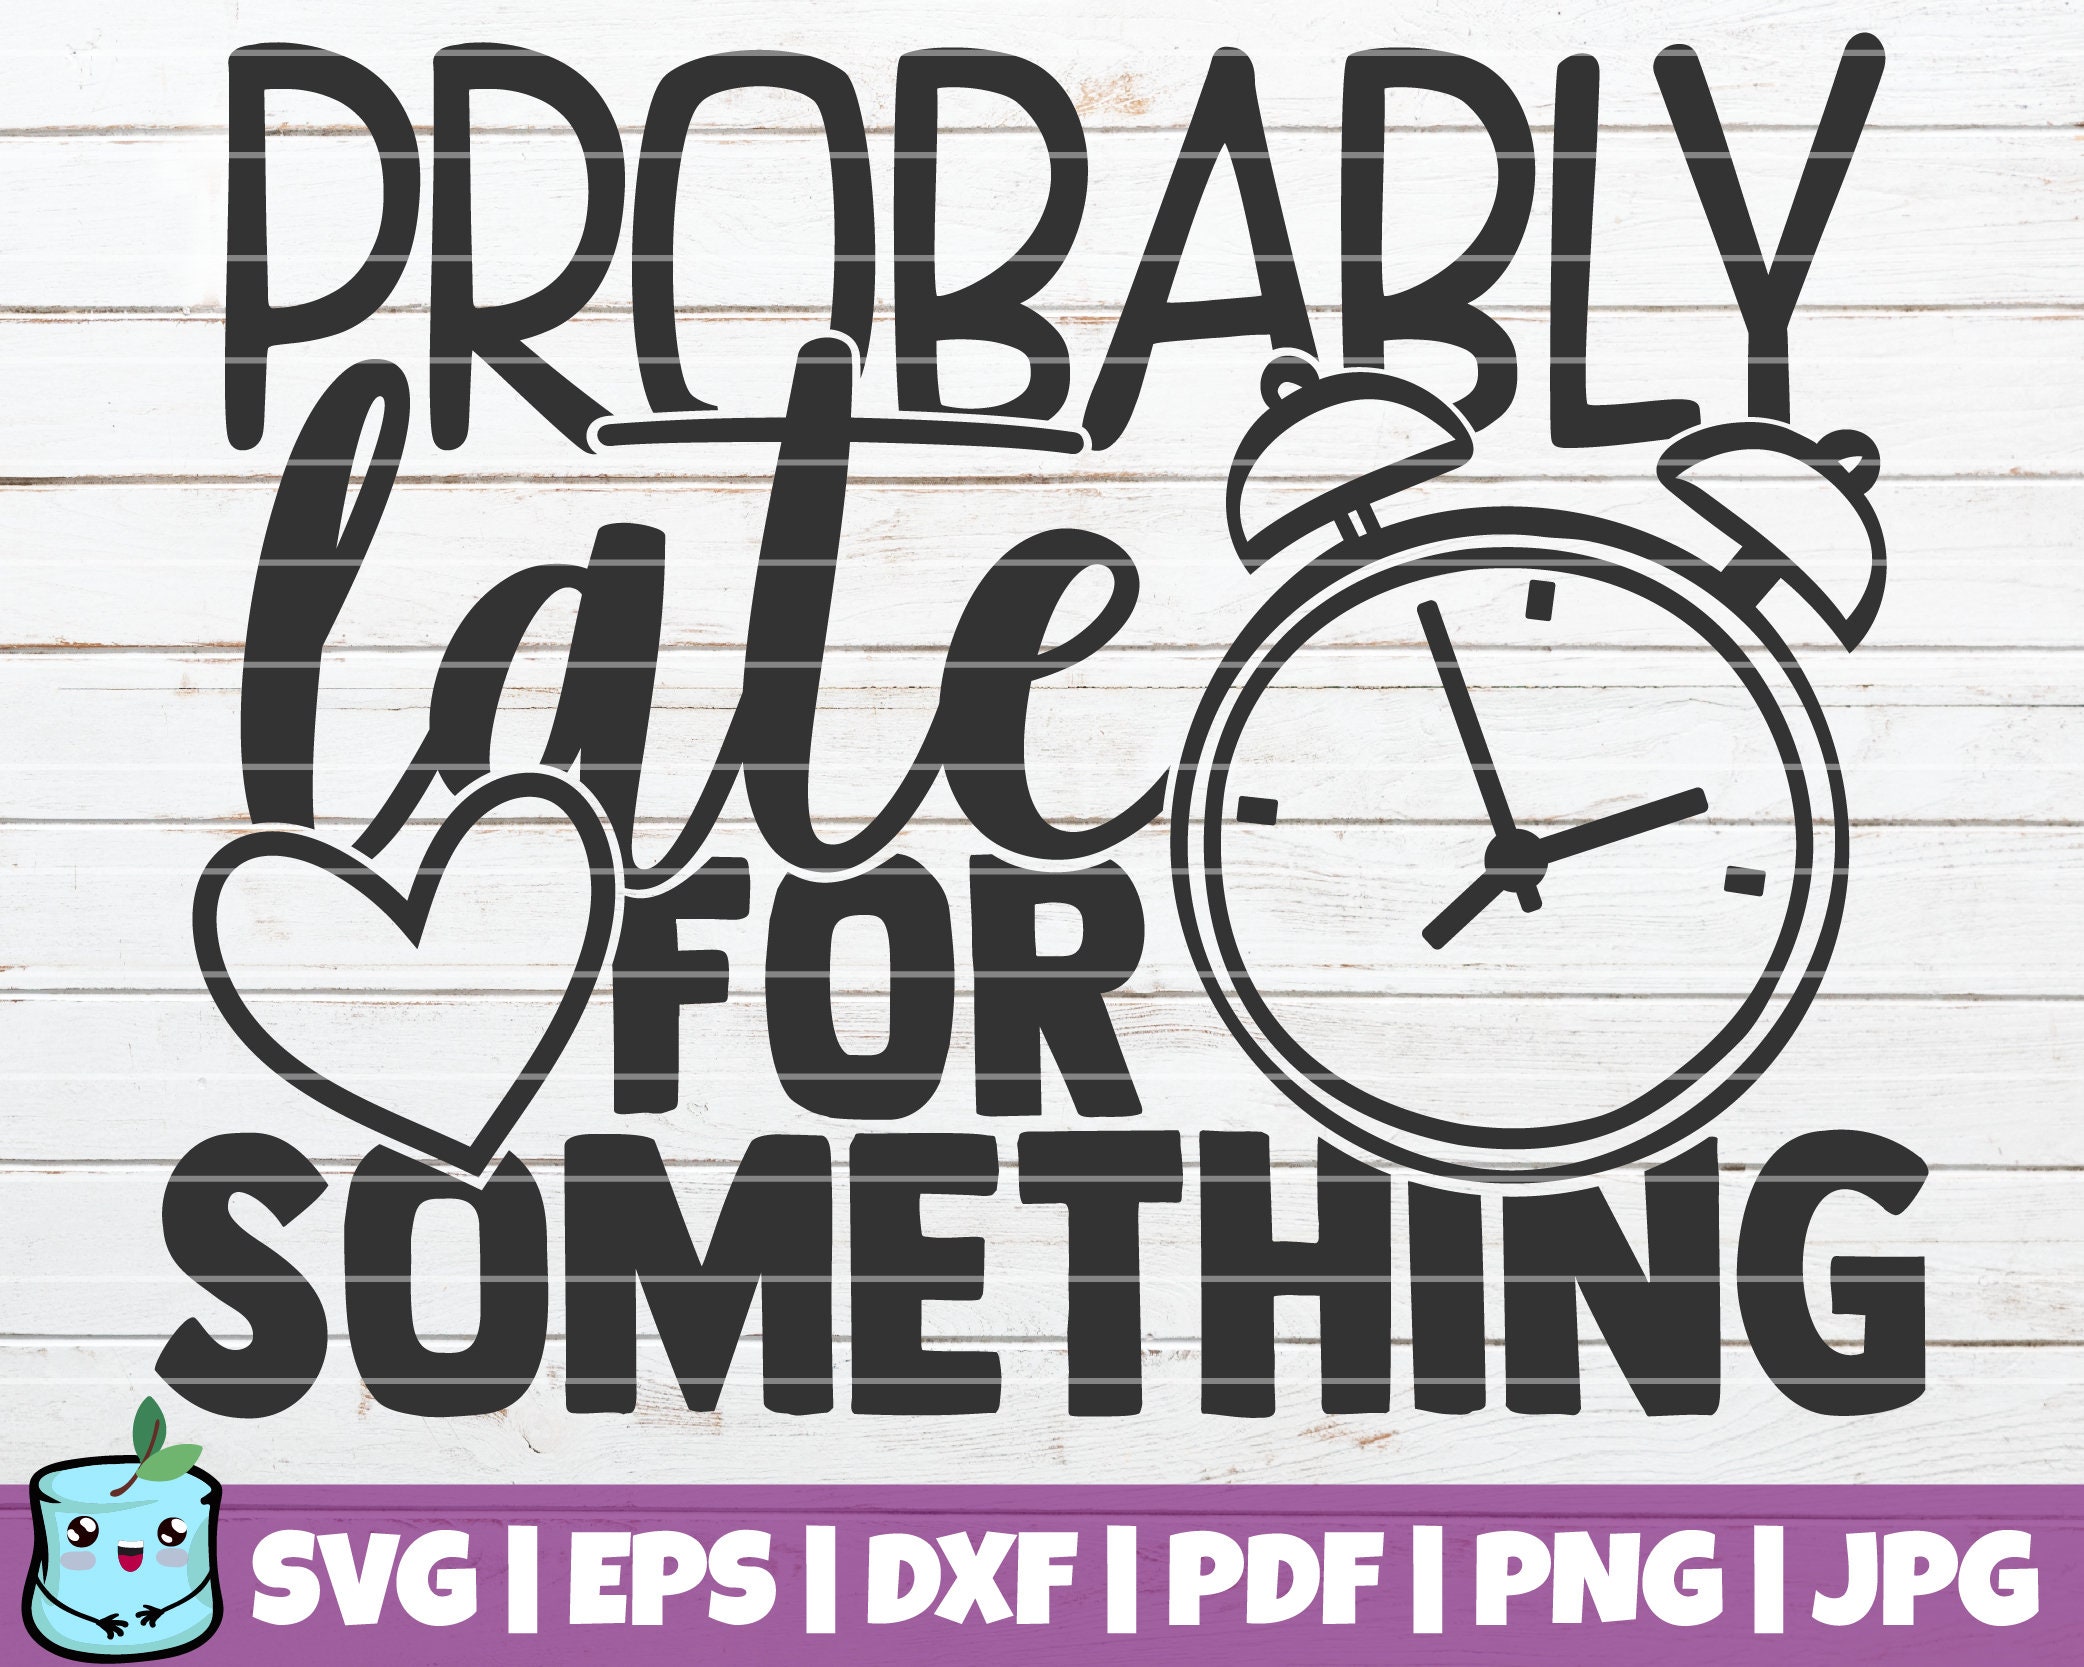 PNG Dxf Png Eps Sublimation Digital Cut File For Cricut late fors something svg Probably late for something Svg